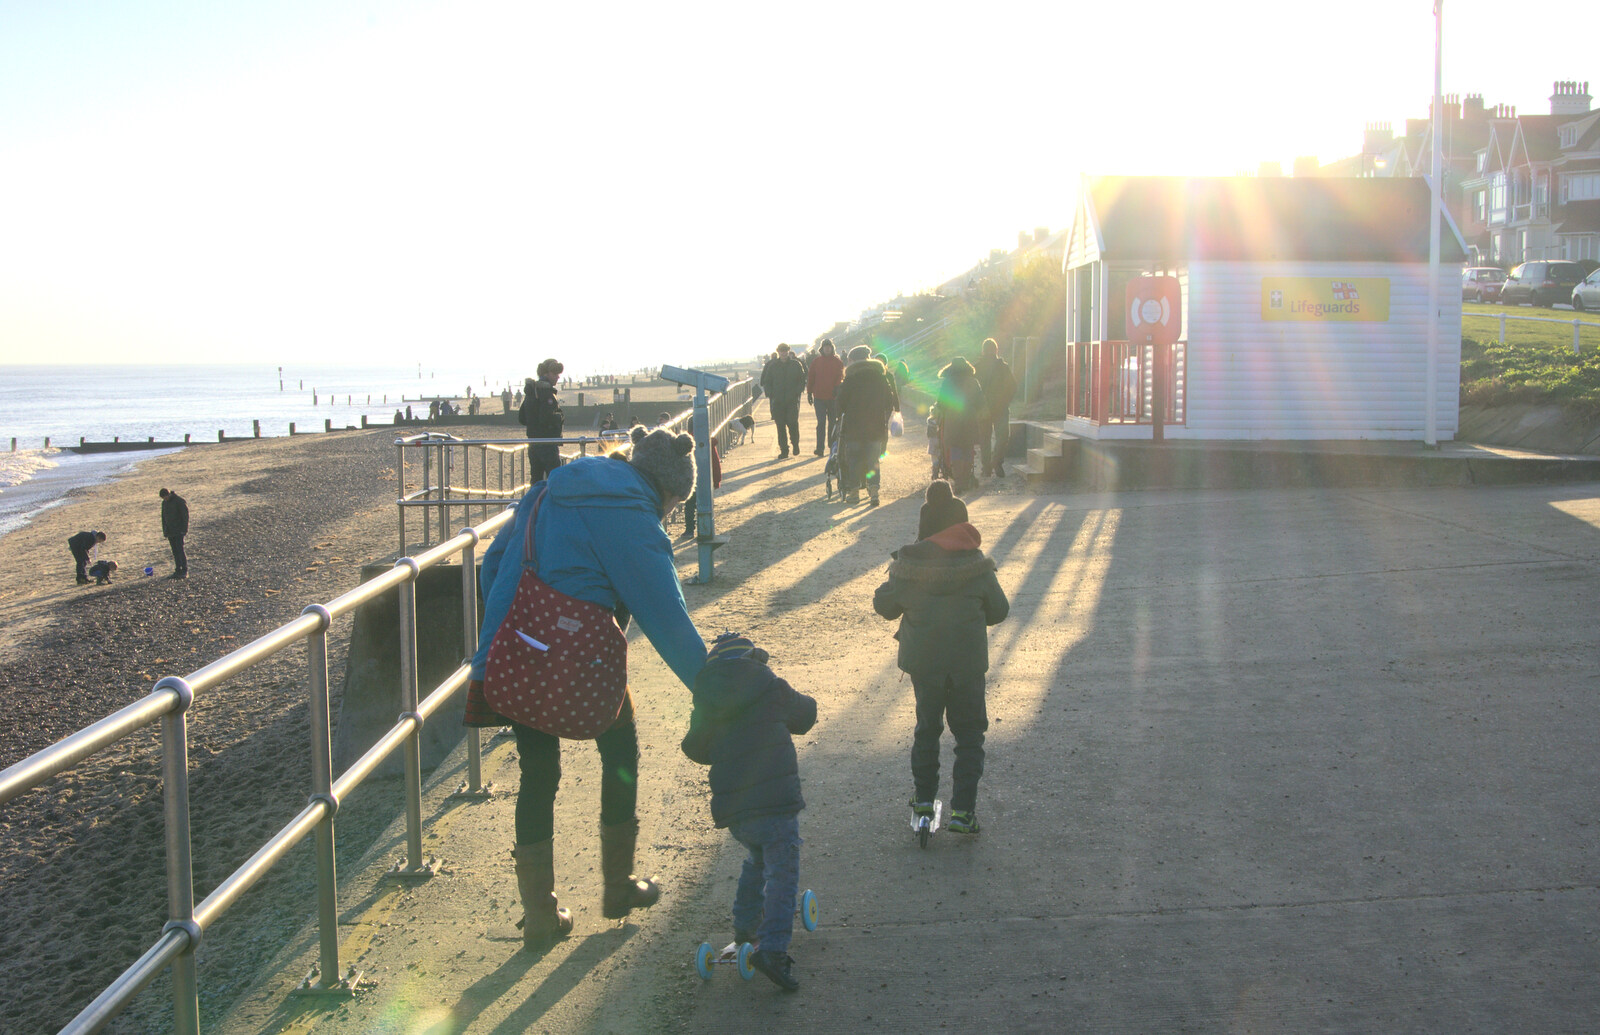 We head off down the promenade from Sunset on the Beach, Southwold, Suffolk - 30th December 2014